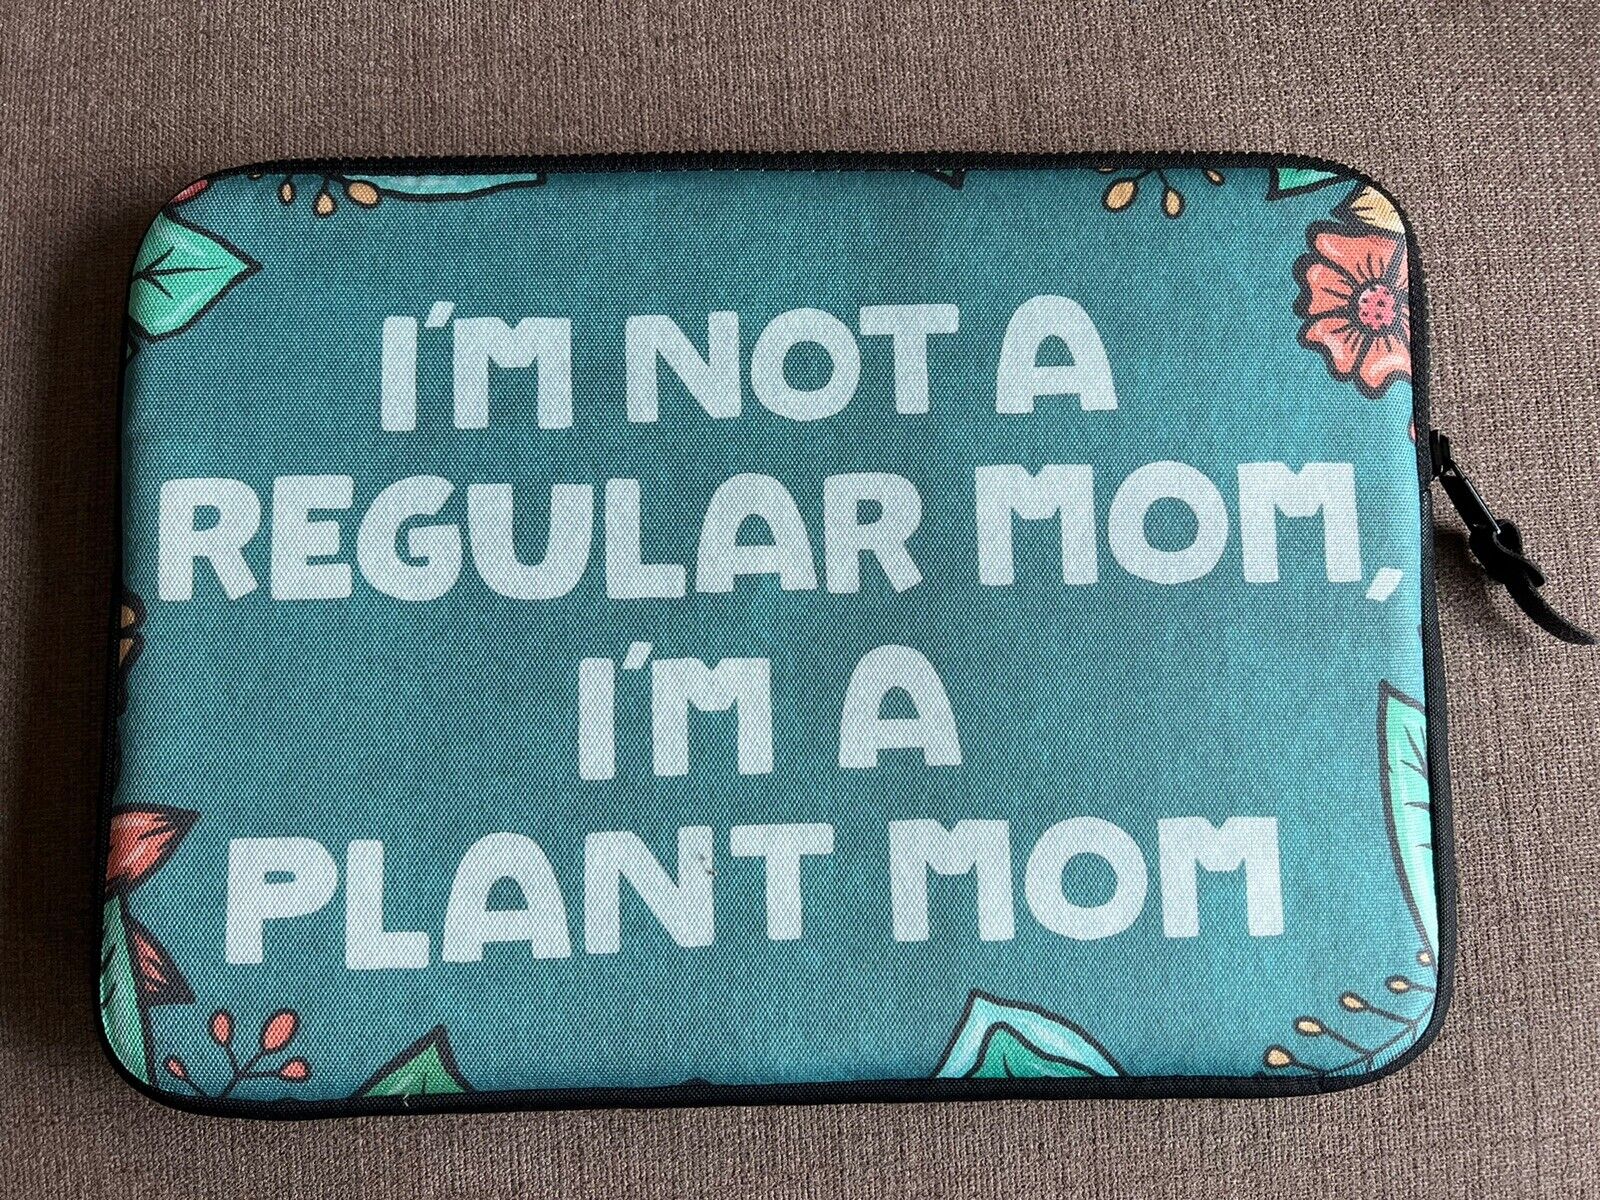 Society 6 Laptop Zipper Case Sleeve Padded Carrying Travel Case 10x14 Plant Mom